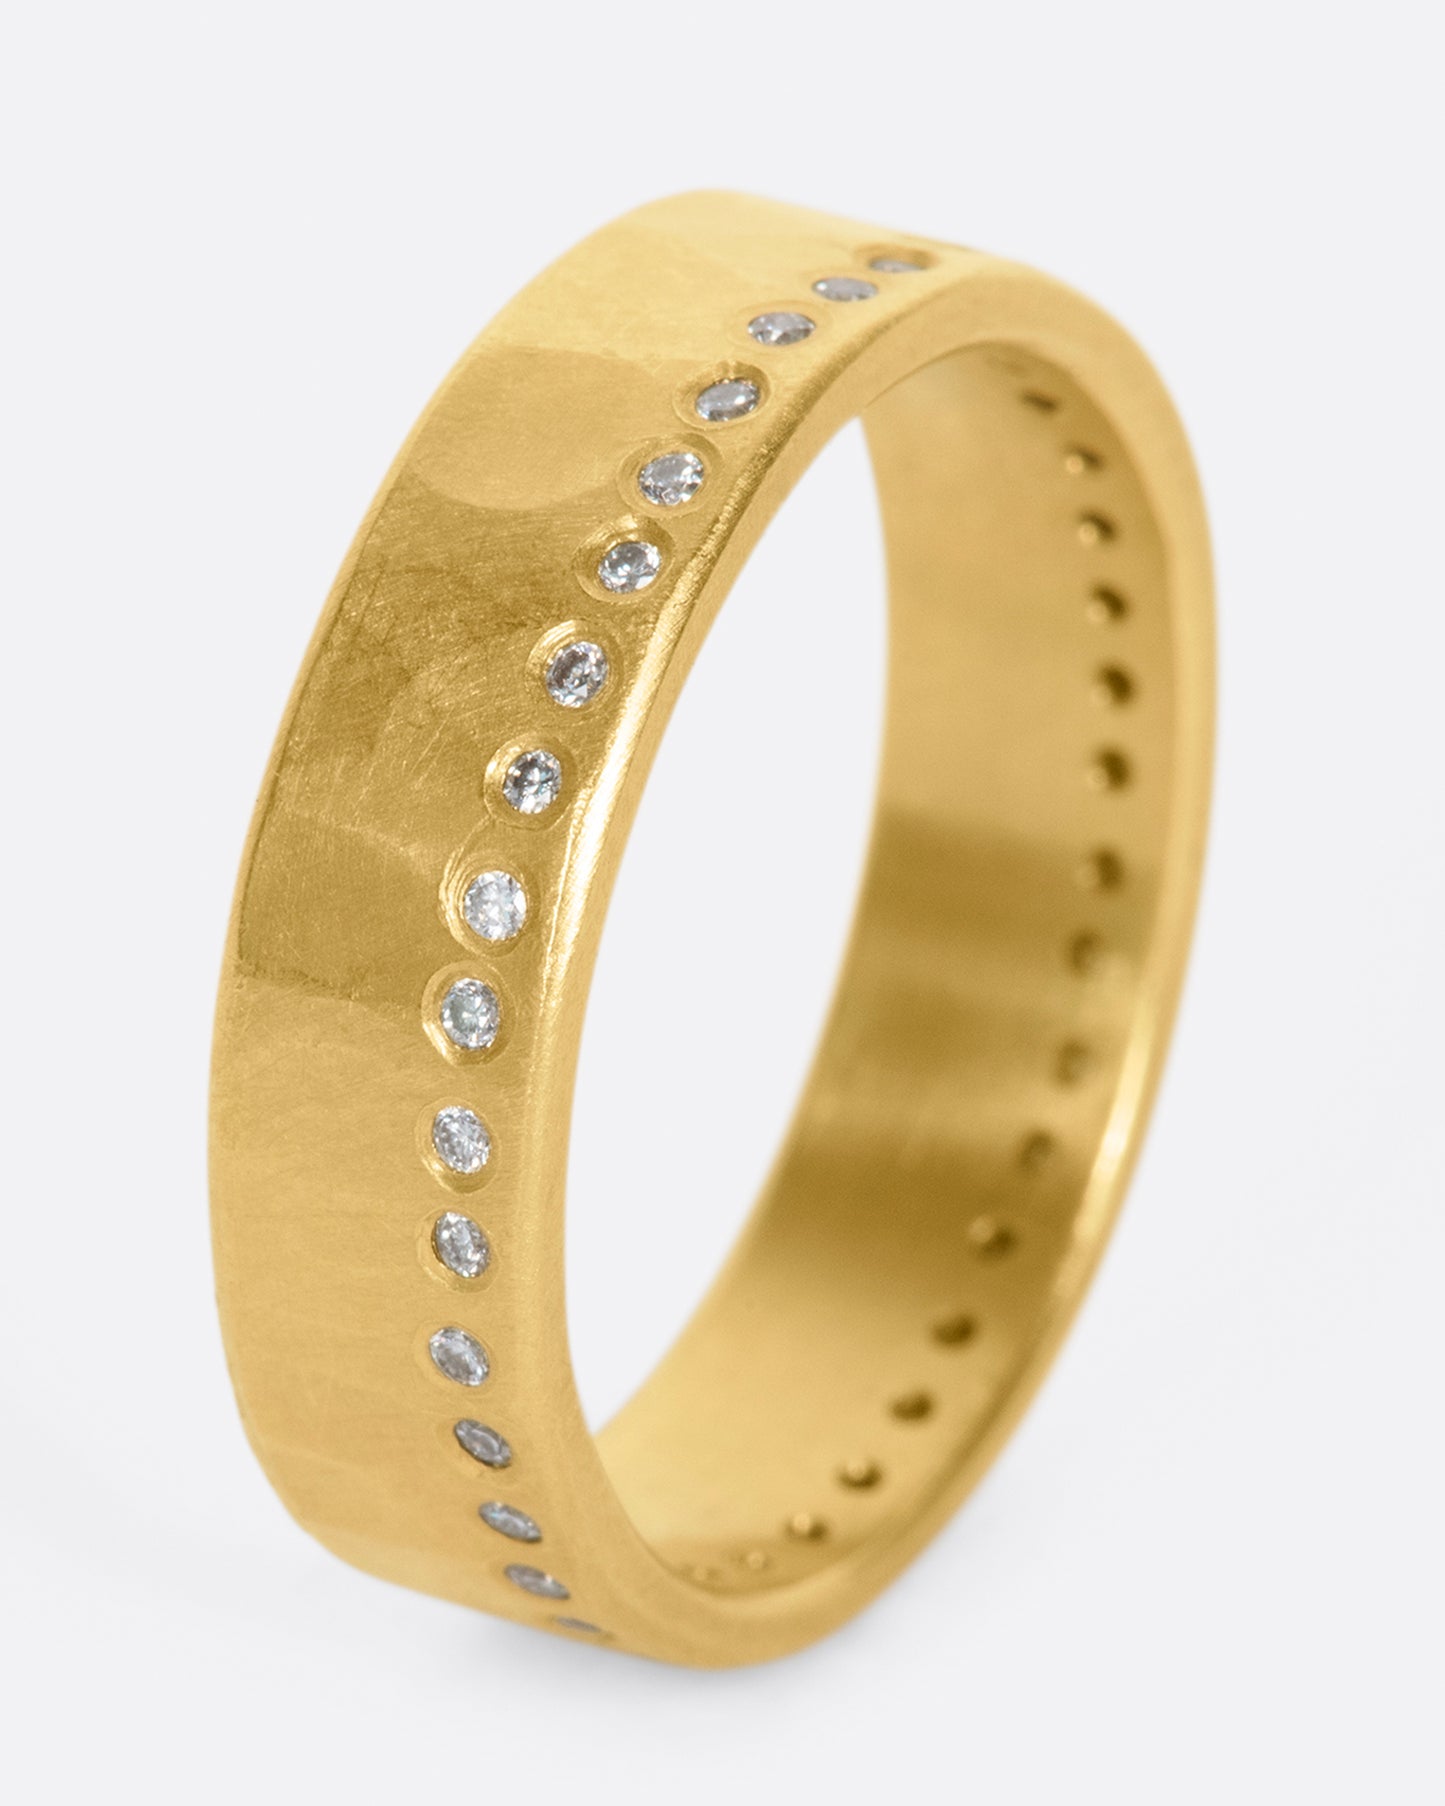 A hammered, matte gold band with a line of round diamonds all the way around.